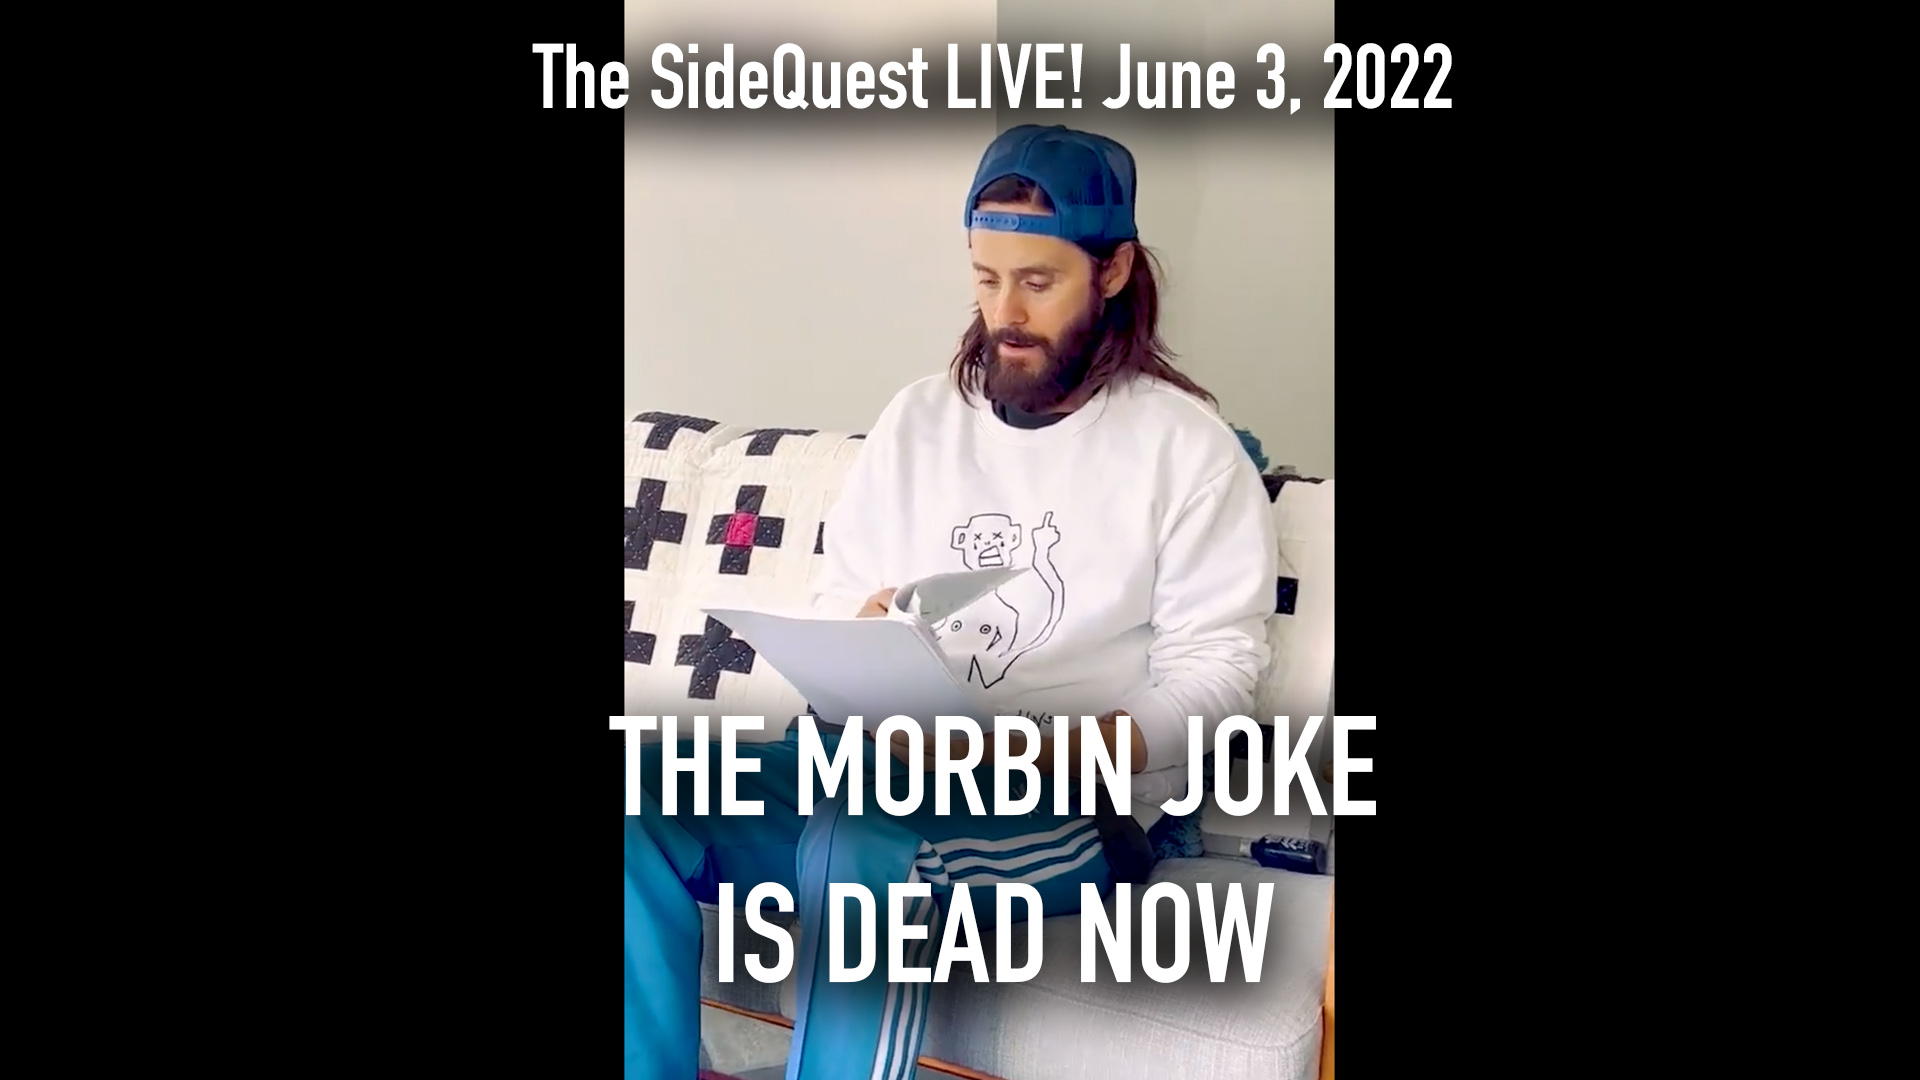 The SideQuest LIVE! June 3, 2022: Thanks, the Morbin joke is dead now